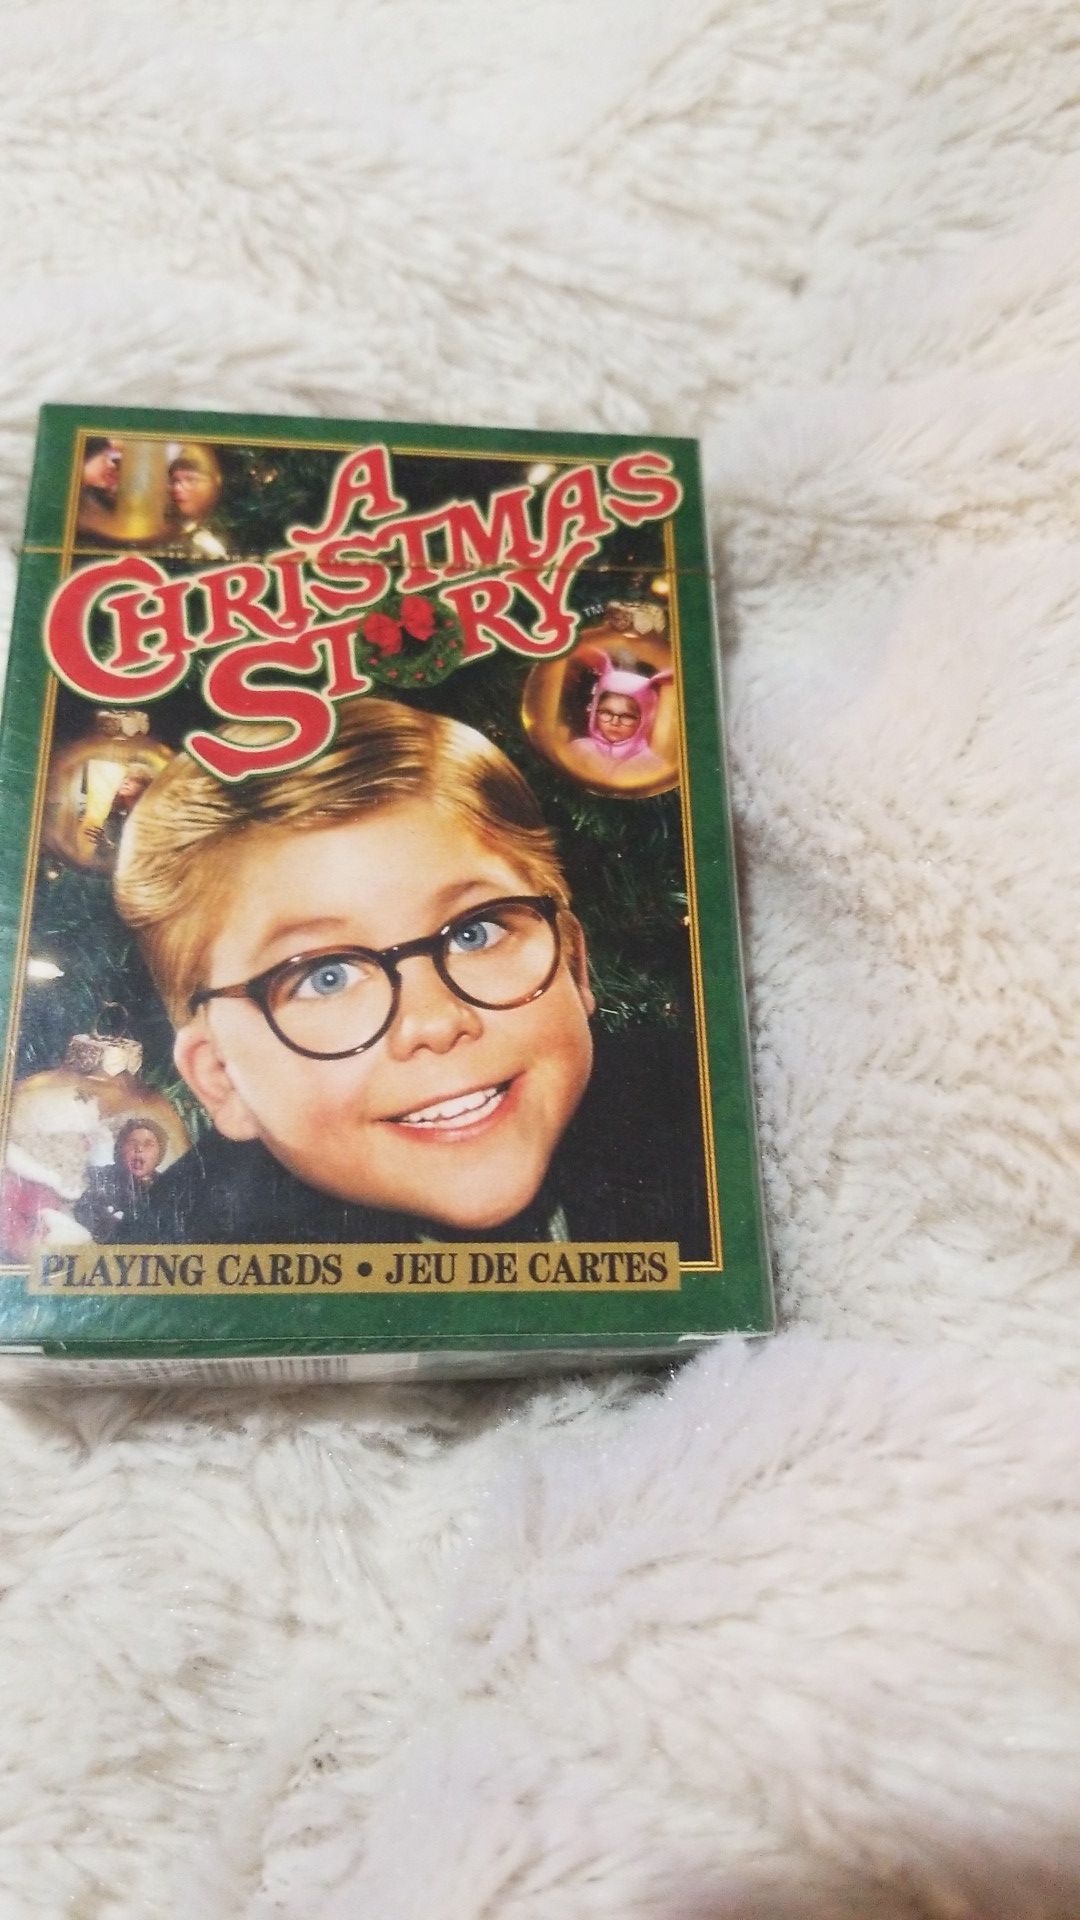 A christmas story playing cards